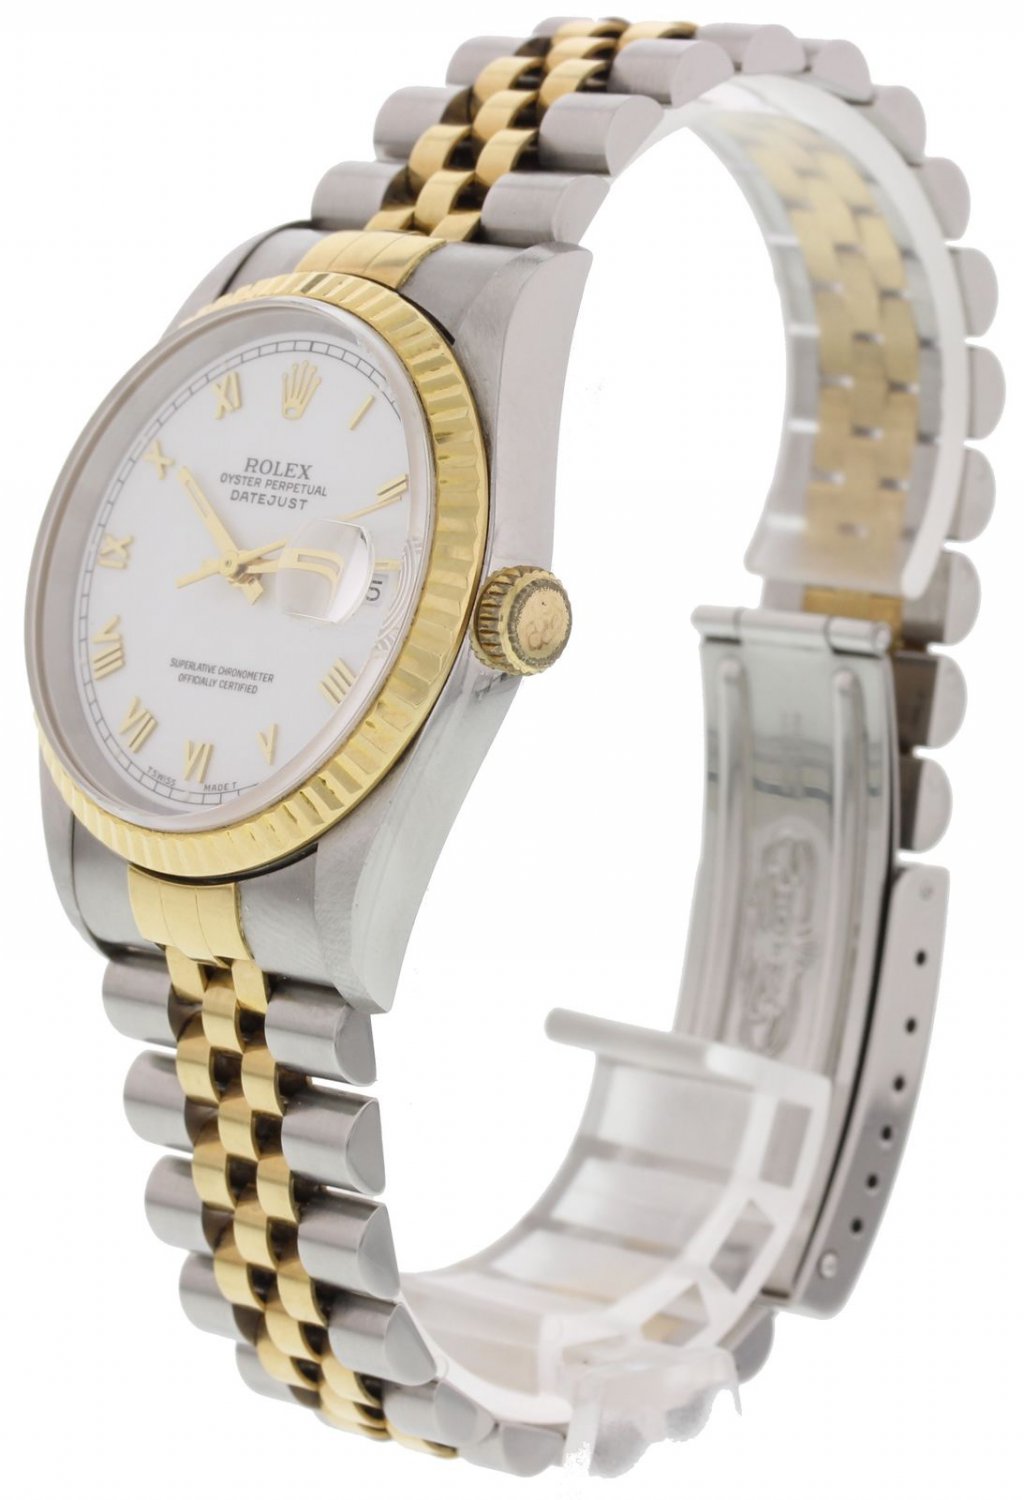 Rolex Oyster Perpetual Datejust 16233 18k Yellow Gold & SS